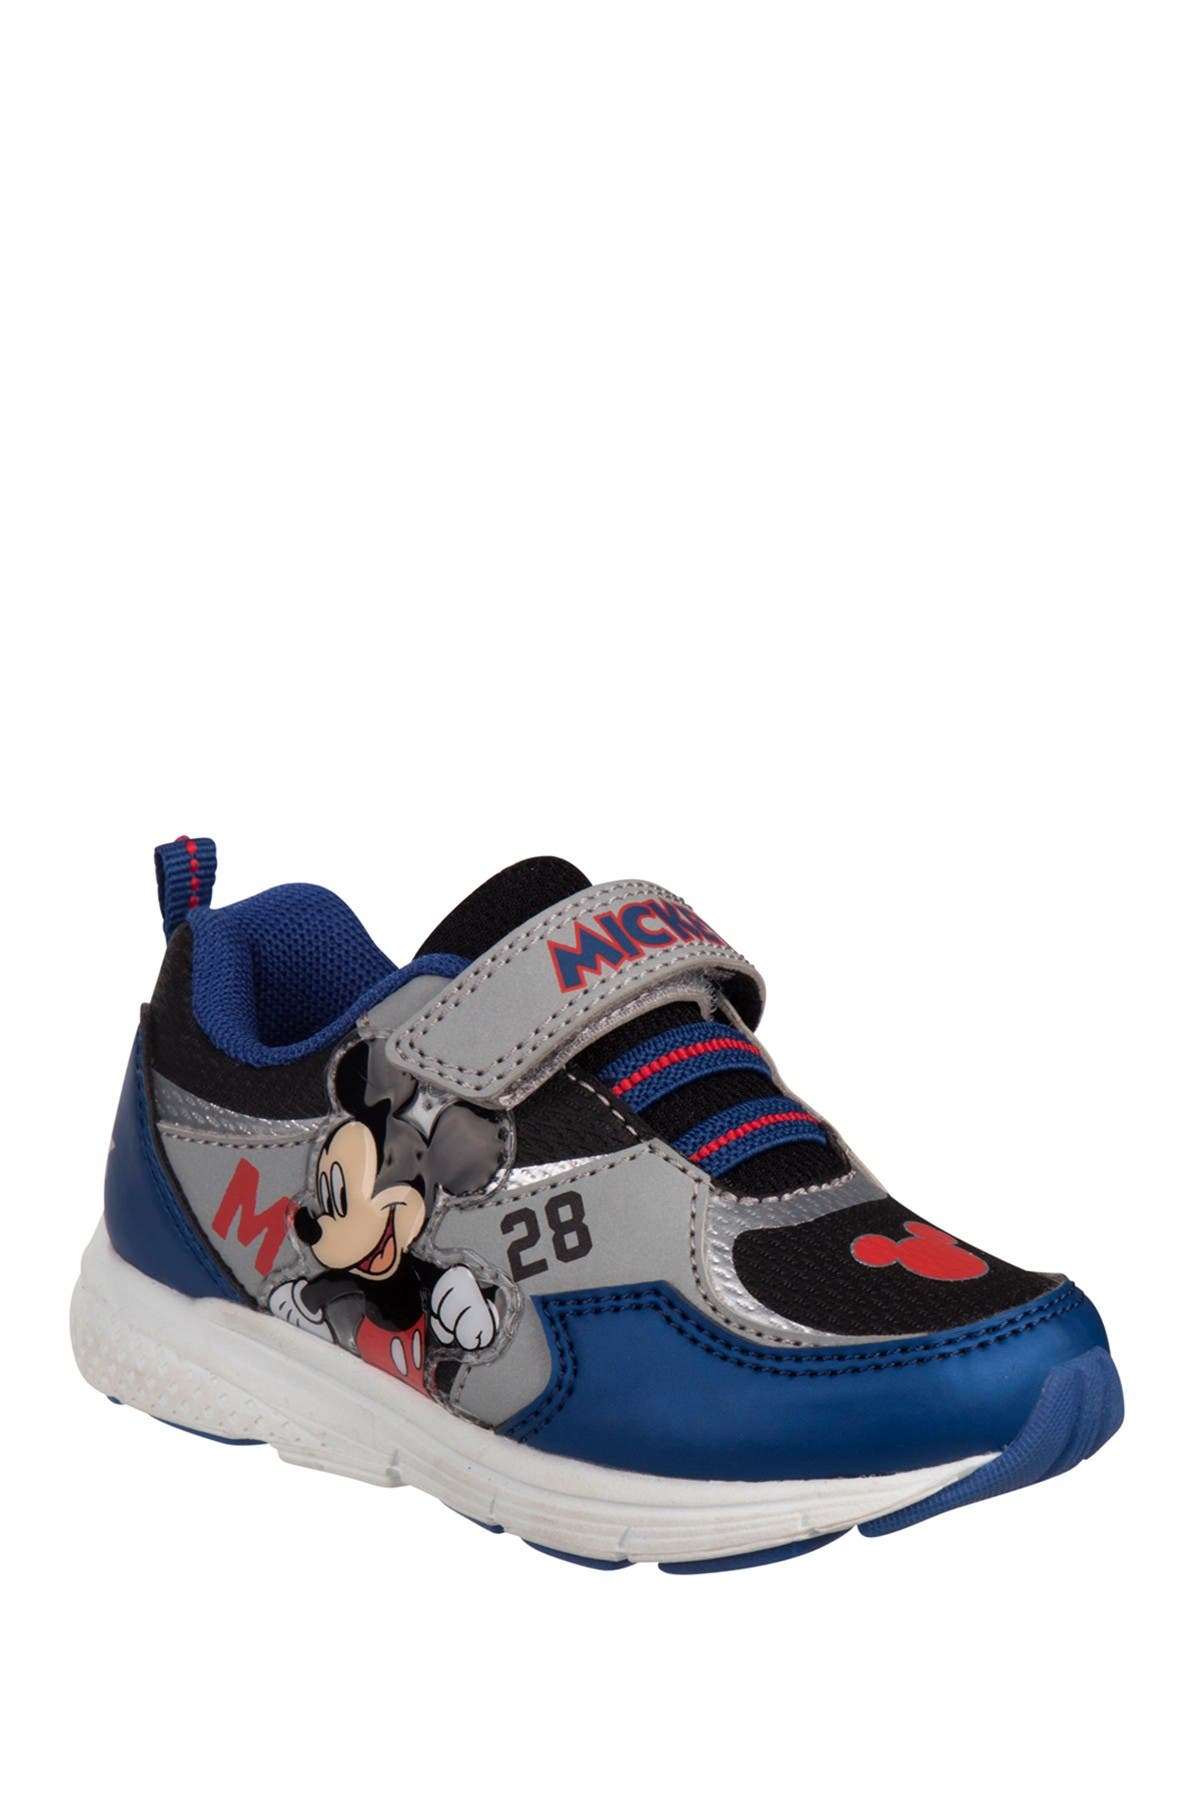 mickey mouse tennis shoes for toddlers